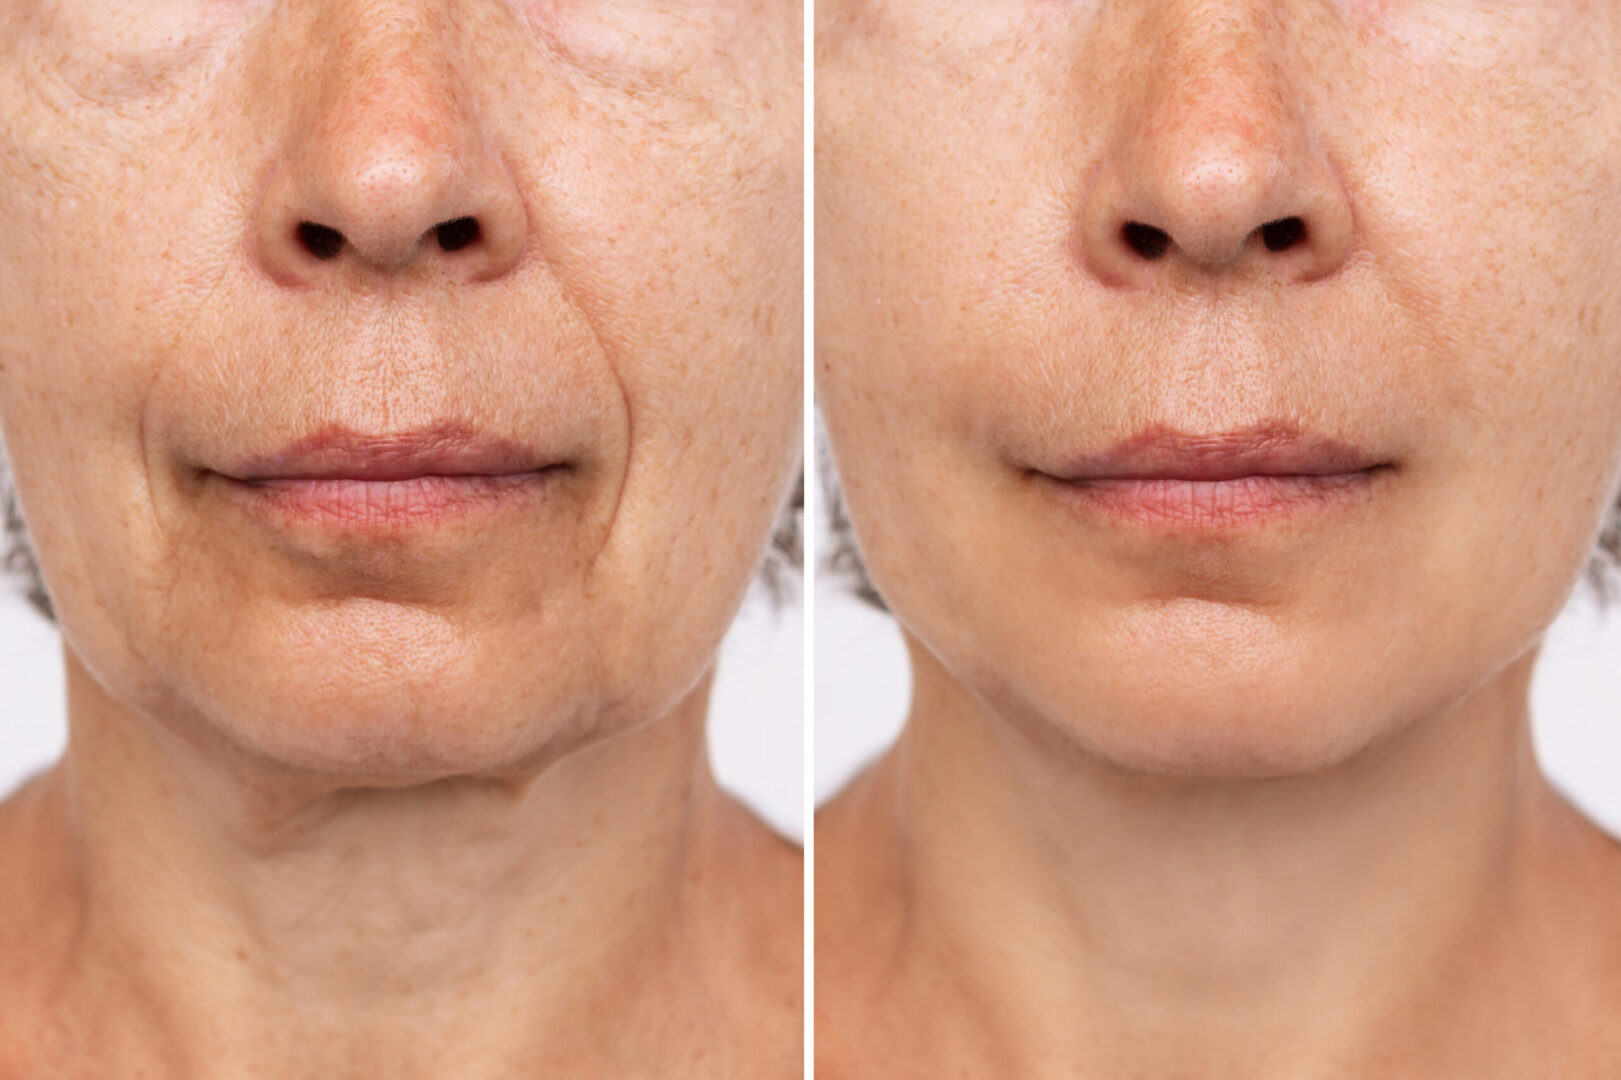 facelift before and after results at Aspire Surgical in Salt Lake City, UT